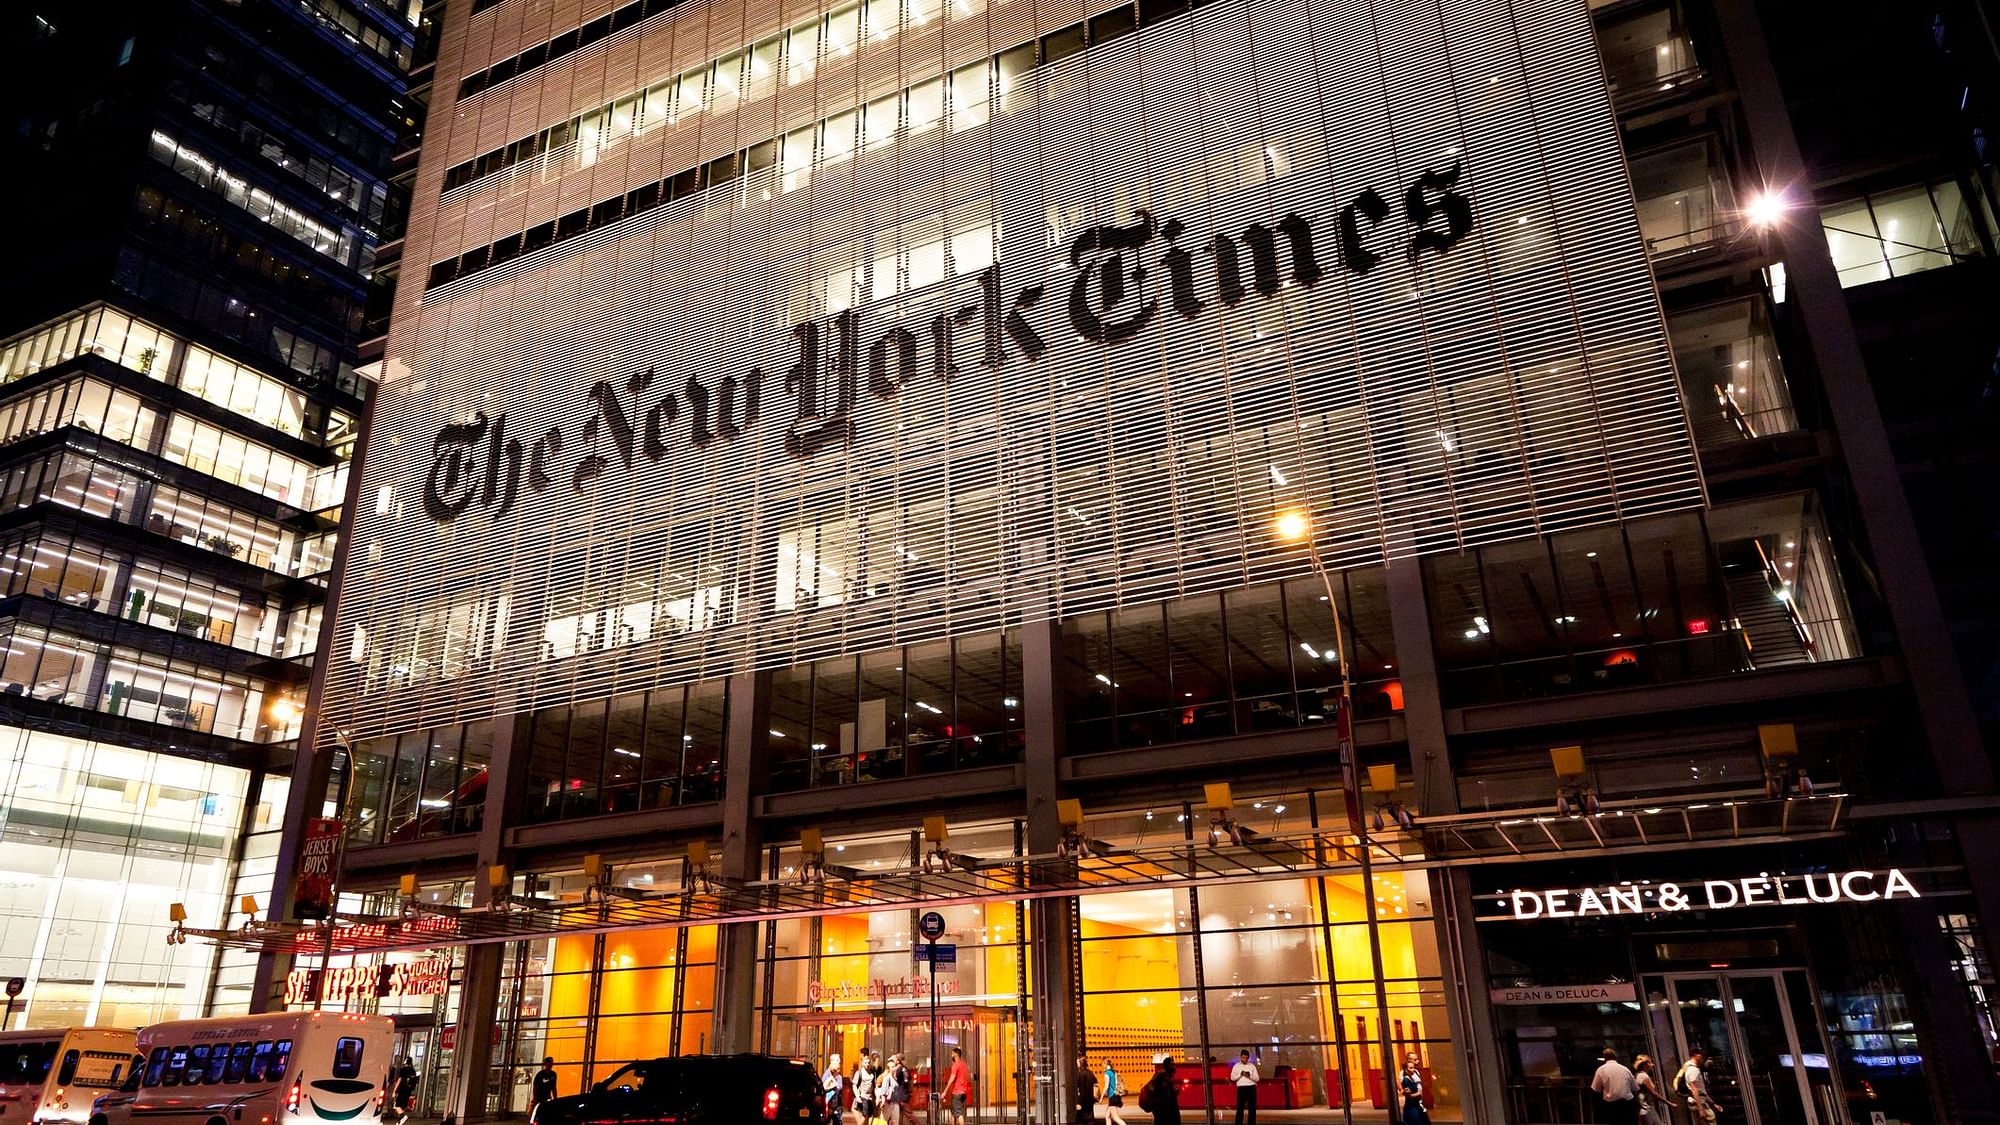 The New York Times offices in NY